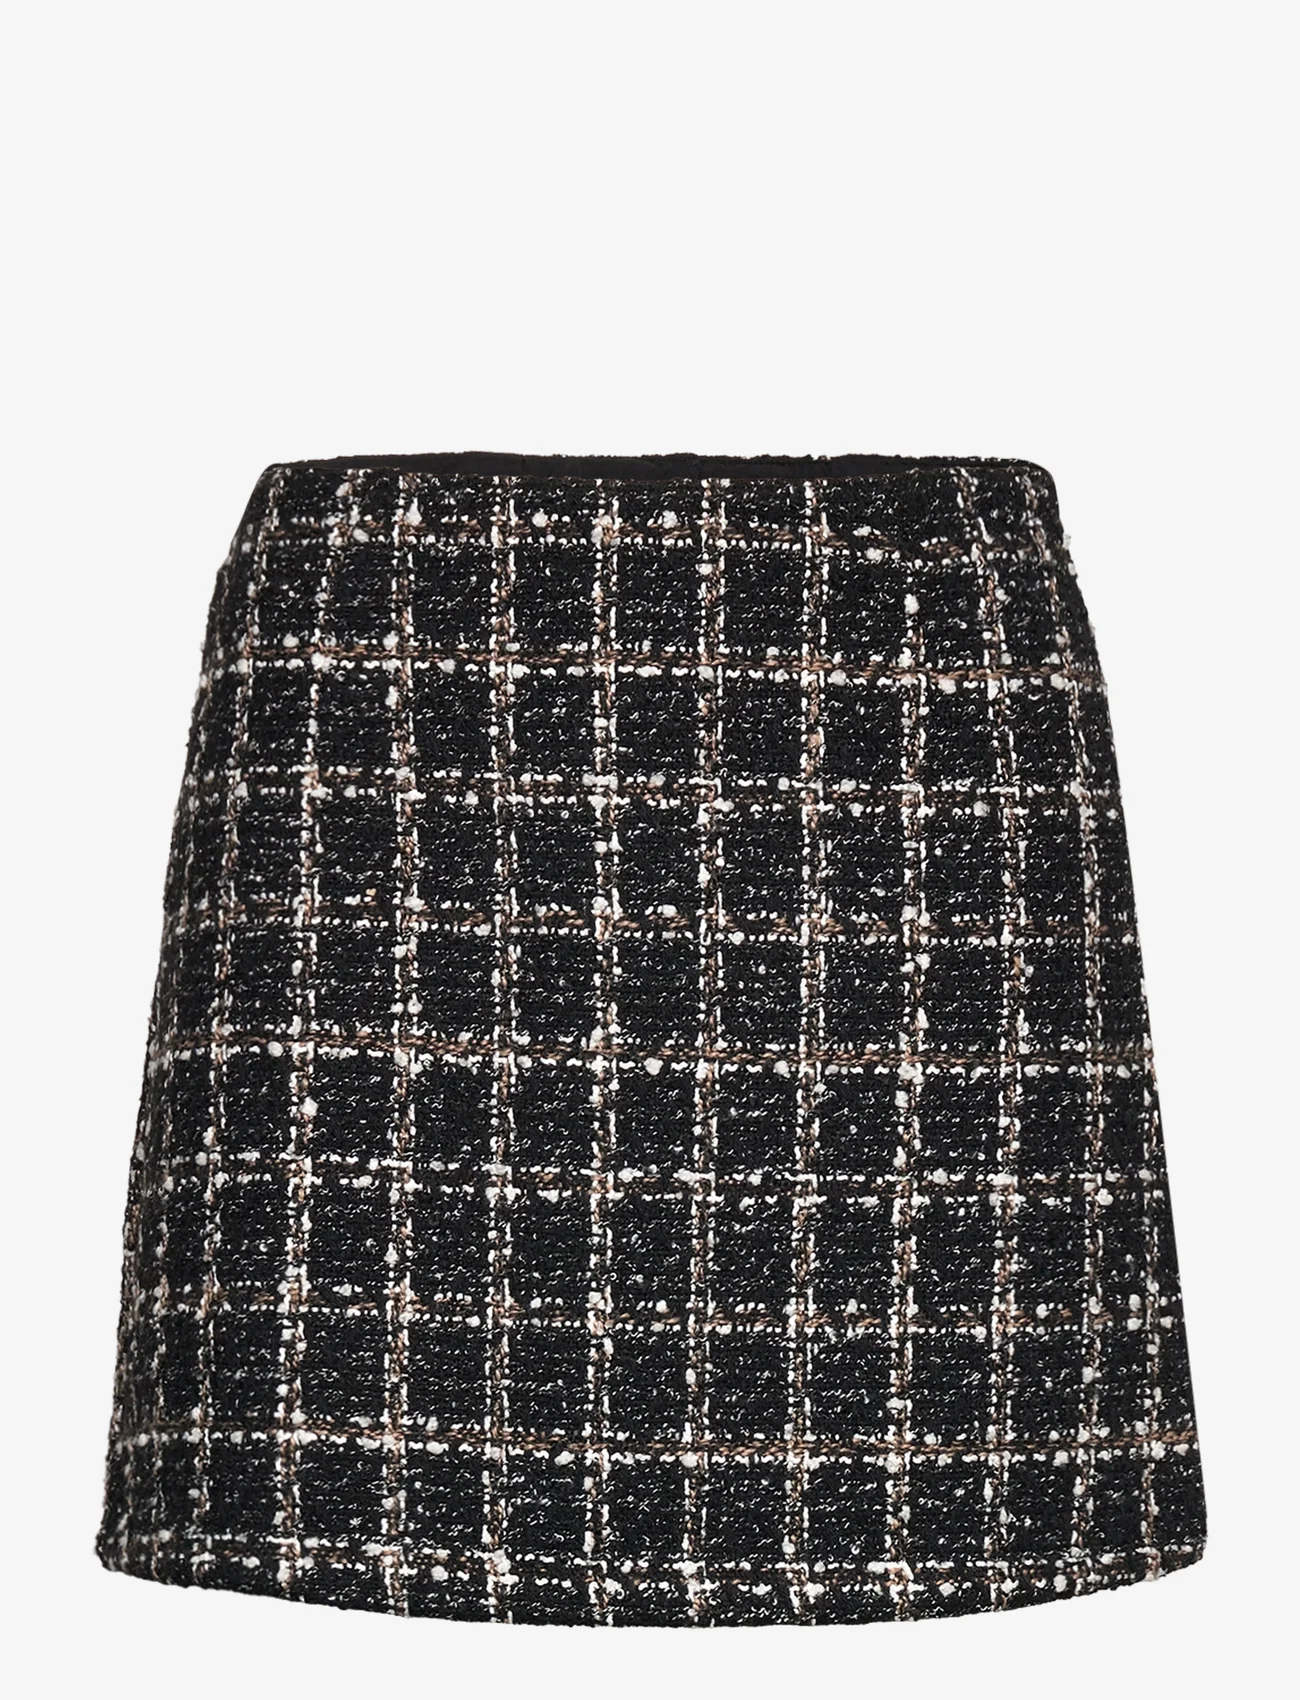 Abercrombie & Fitch - ANF WOMENS SKIRTS - kurze röcke - black and white tweed - 0